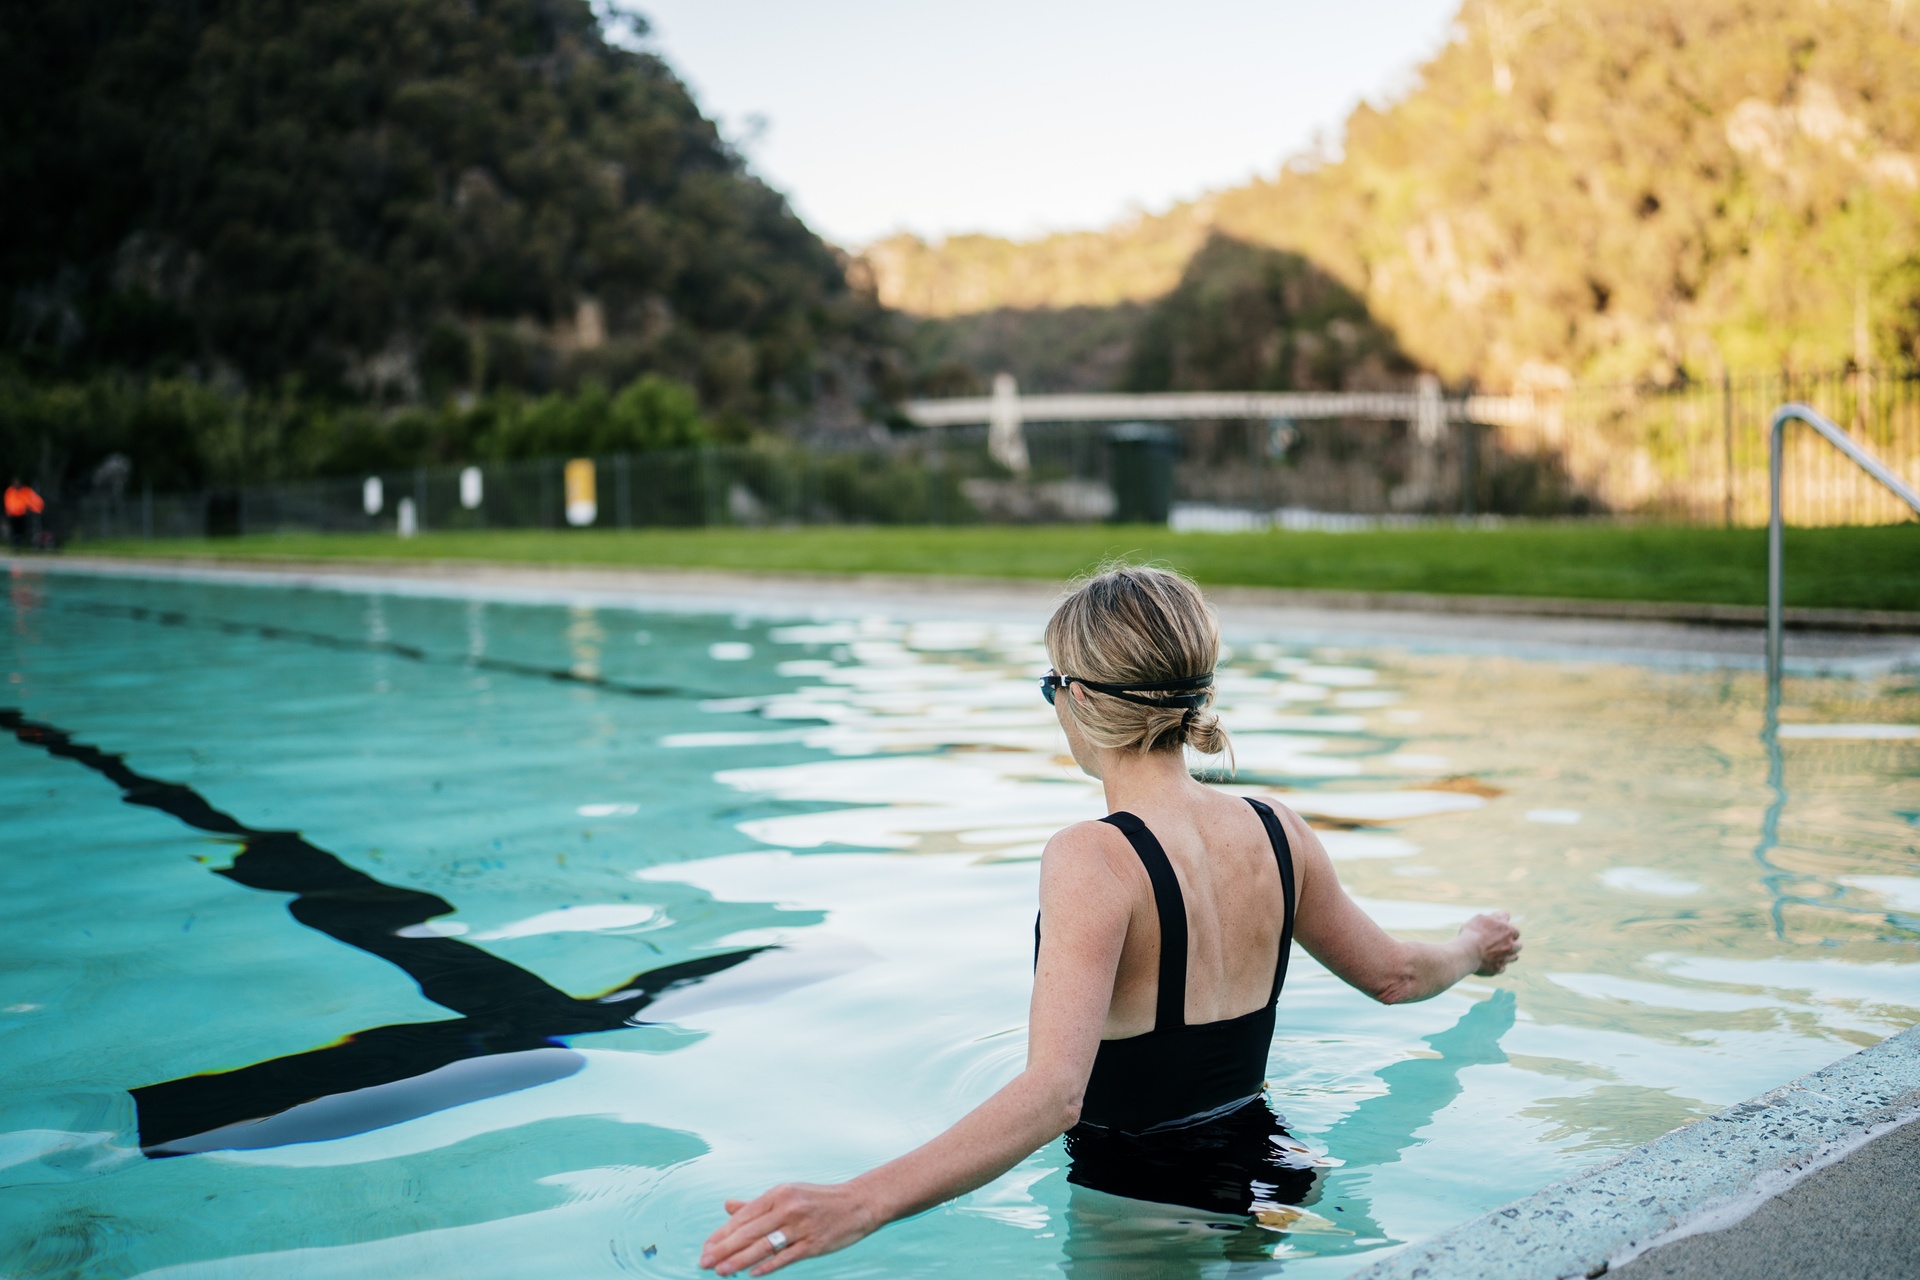 A female swimmer in the pool at the Launceston Gorge. She has blonde hair tied in a bun and her arms open just touching the water. The Suspension Bridge can be seen in the distance.